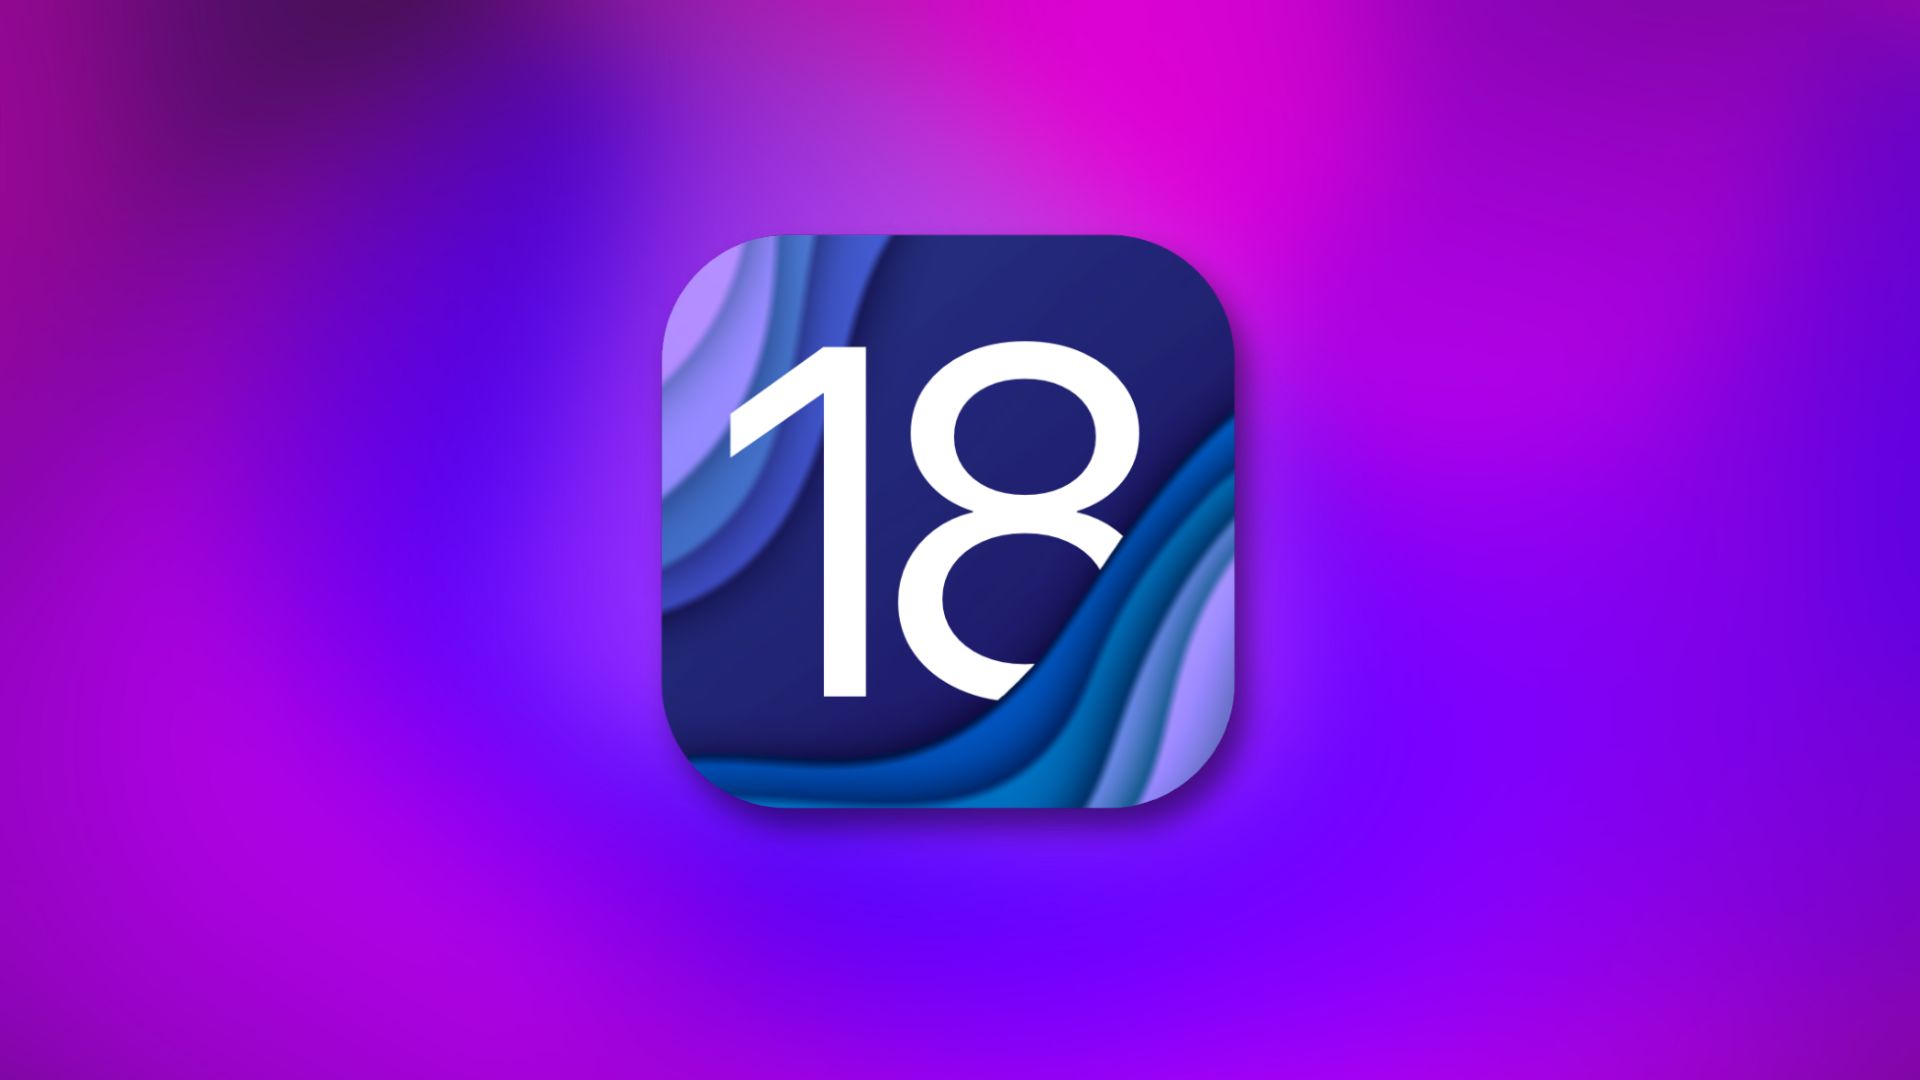 iOS 18: The Biggest Update Yet, All Thanks To Apple Intelligence